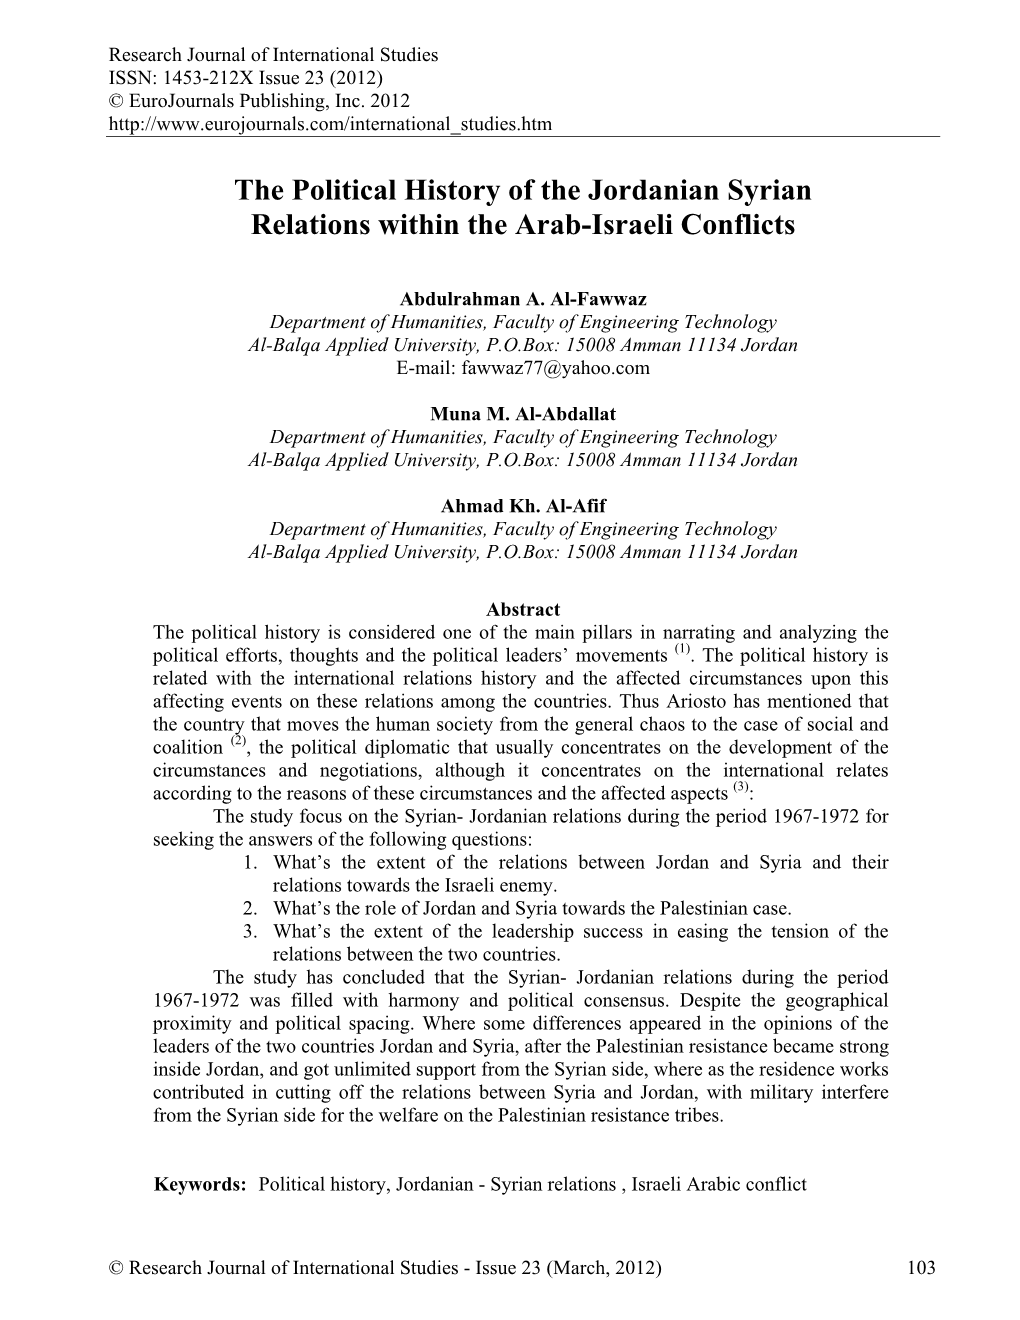 The Political History of the Jordanian Syrian Relations Within the Arab-Israeli Conflicts